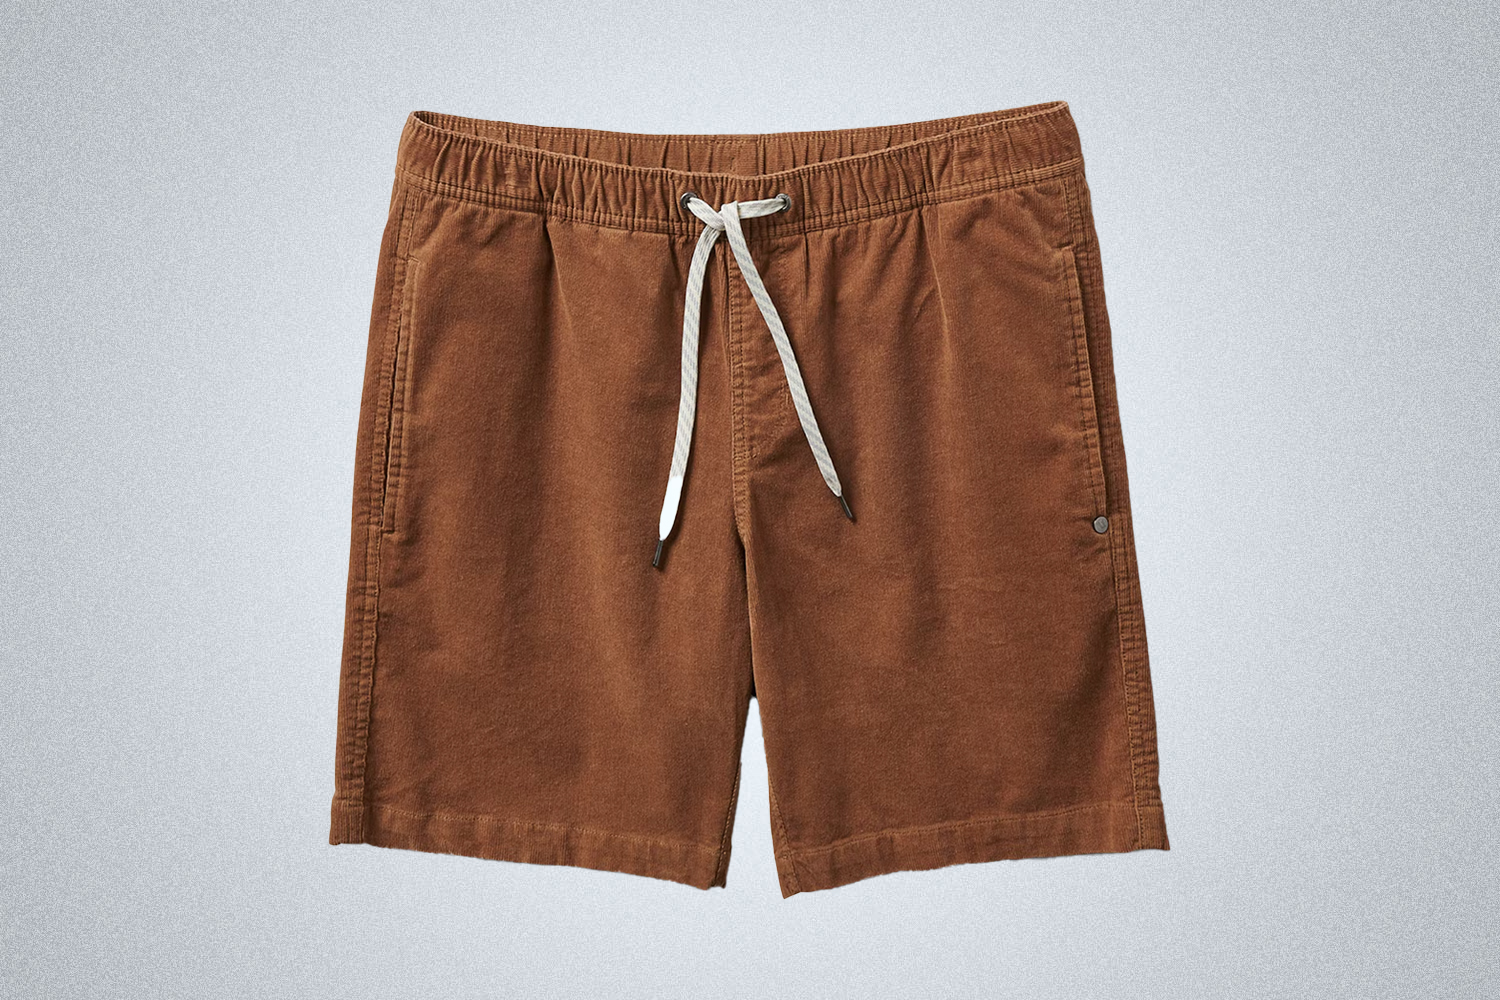 a pair of brown corduroy shorts from Vuori on a grey background